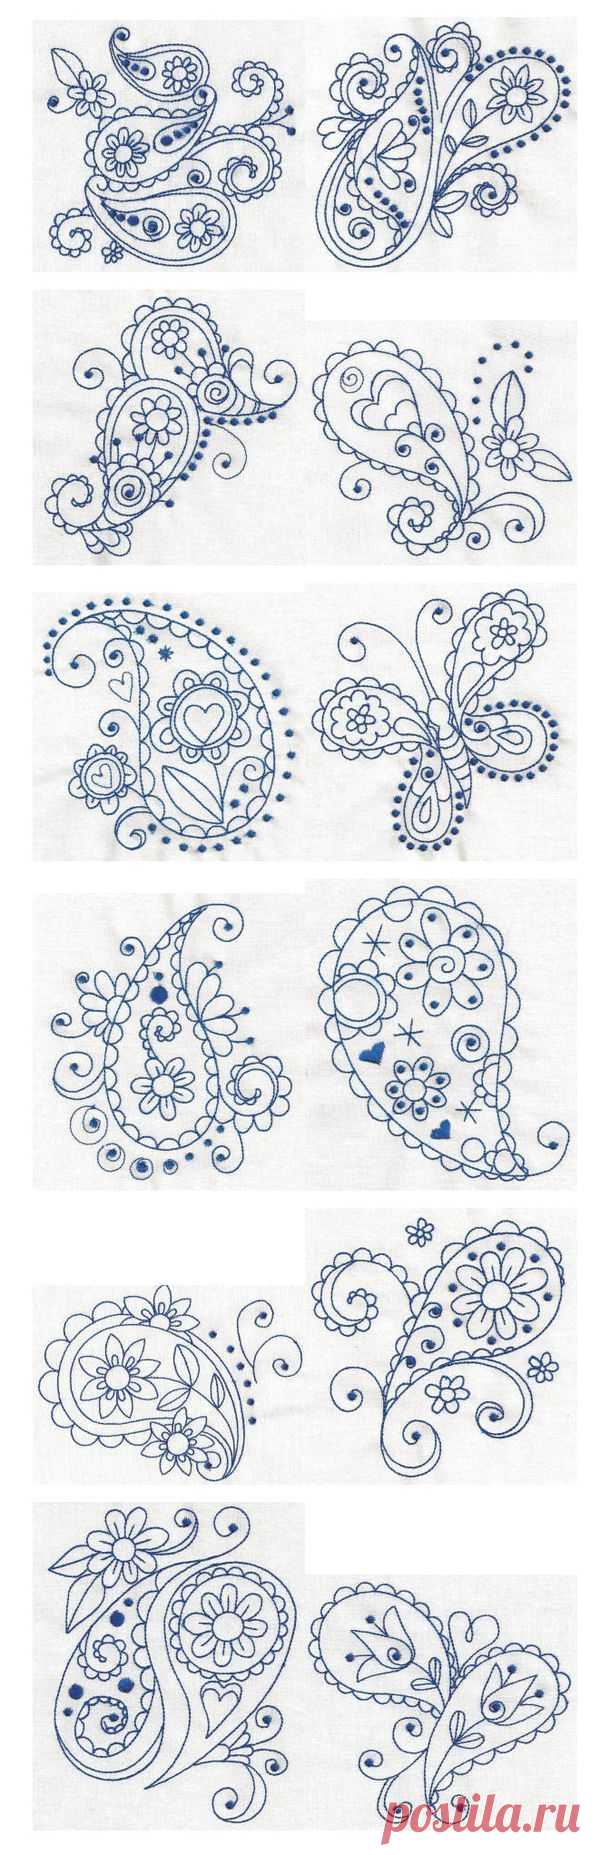 The skill in these are incredible. THe paisley...